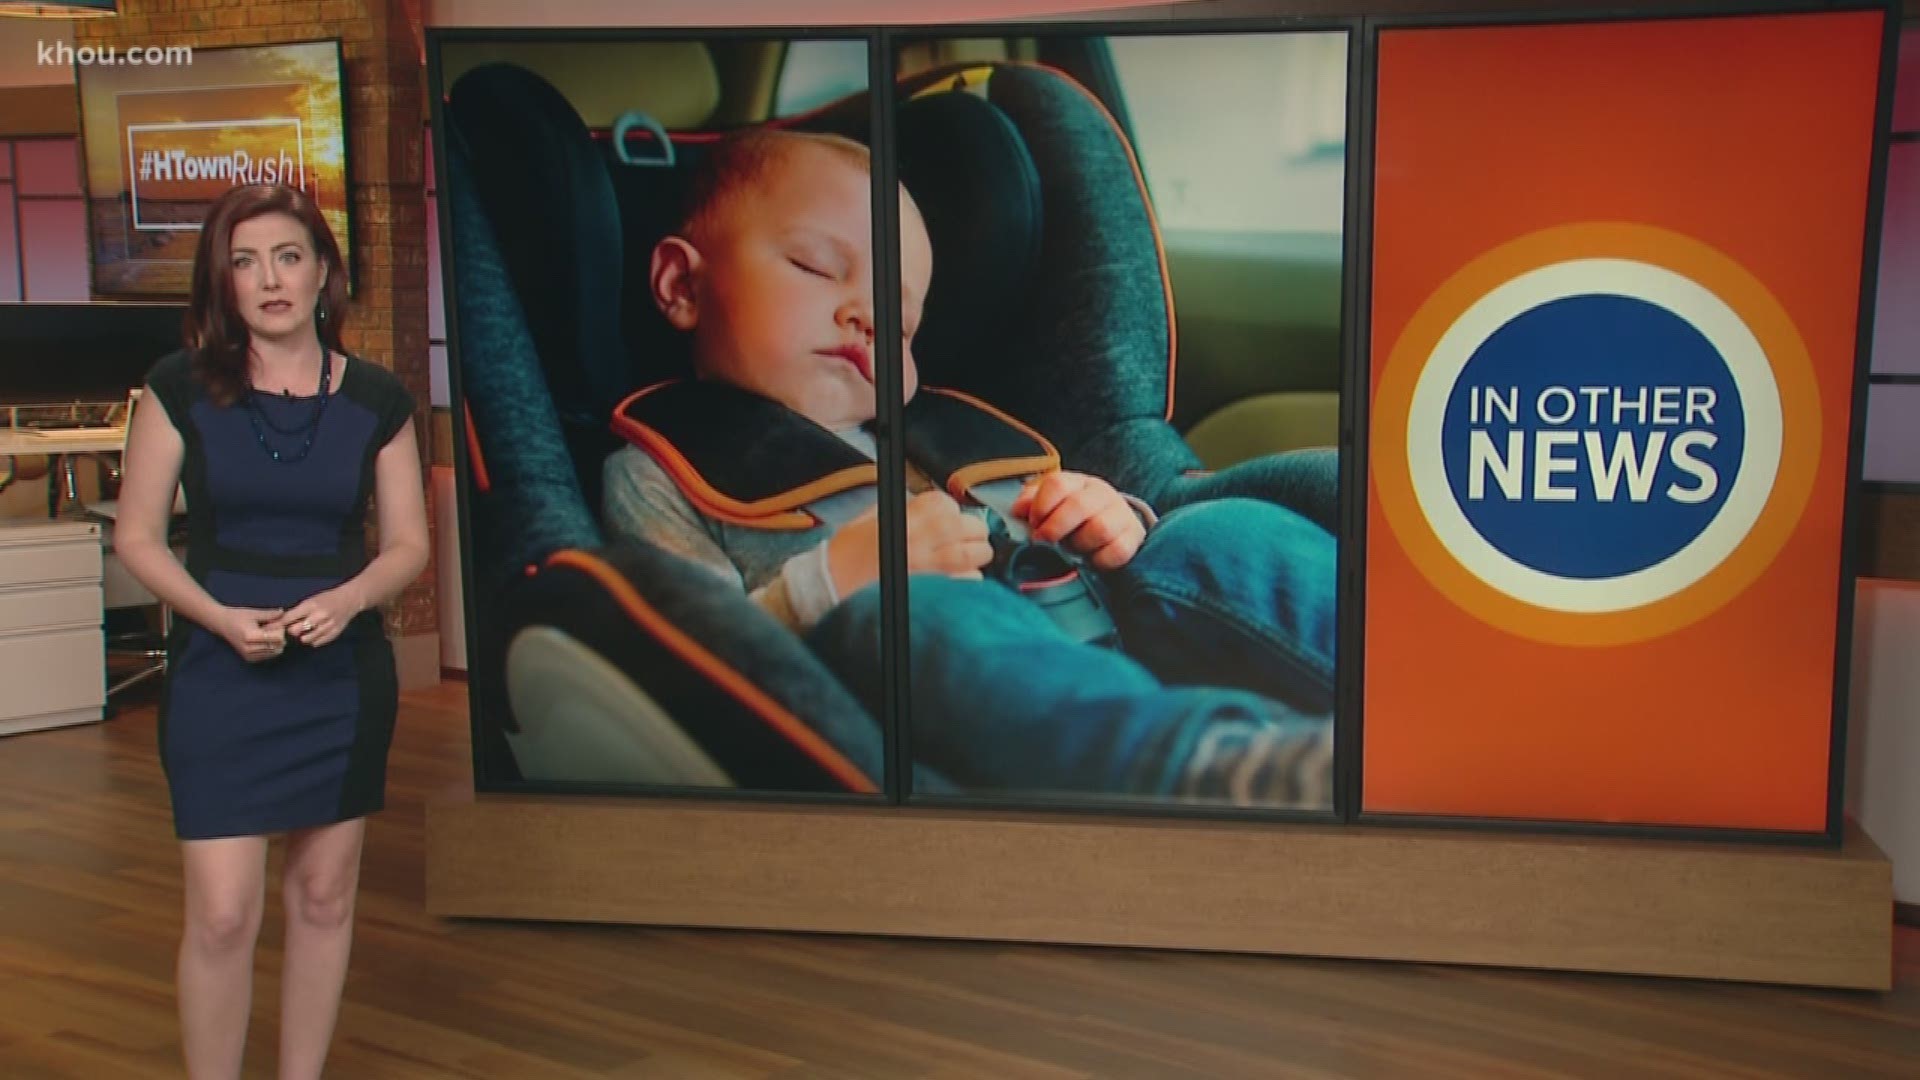 Time for “In Other News,” parents, listen up! These are for you! Car seats can be a dangerous place for babies to sleep. Researchers found that's where more than two-thirds of infant deaths happen. Brandi Smith has more.